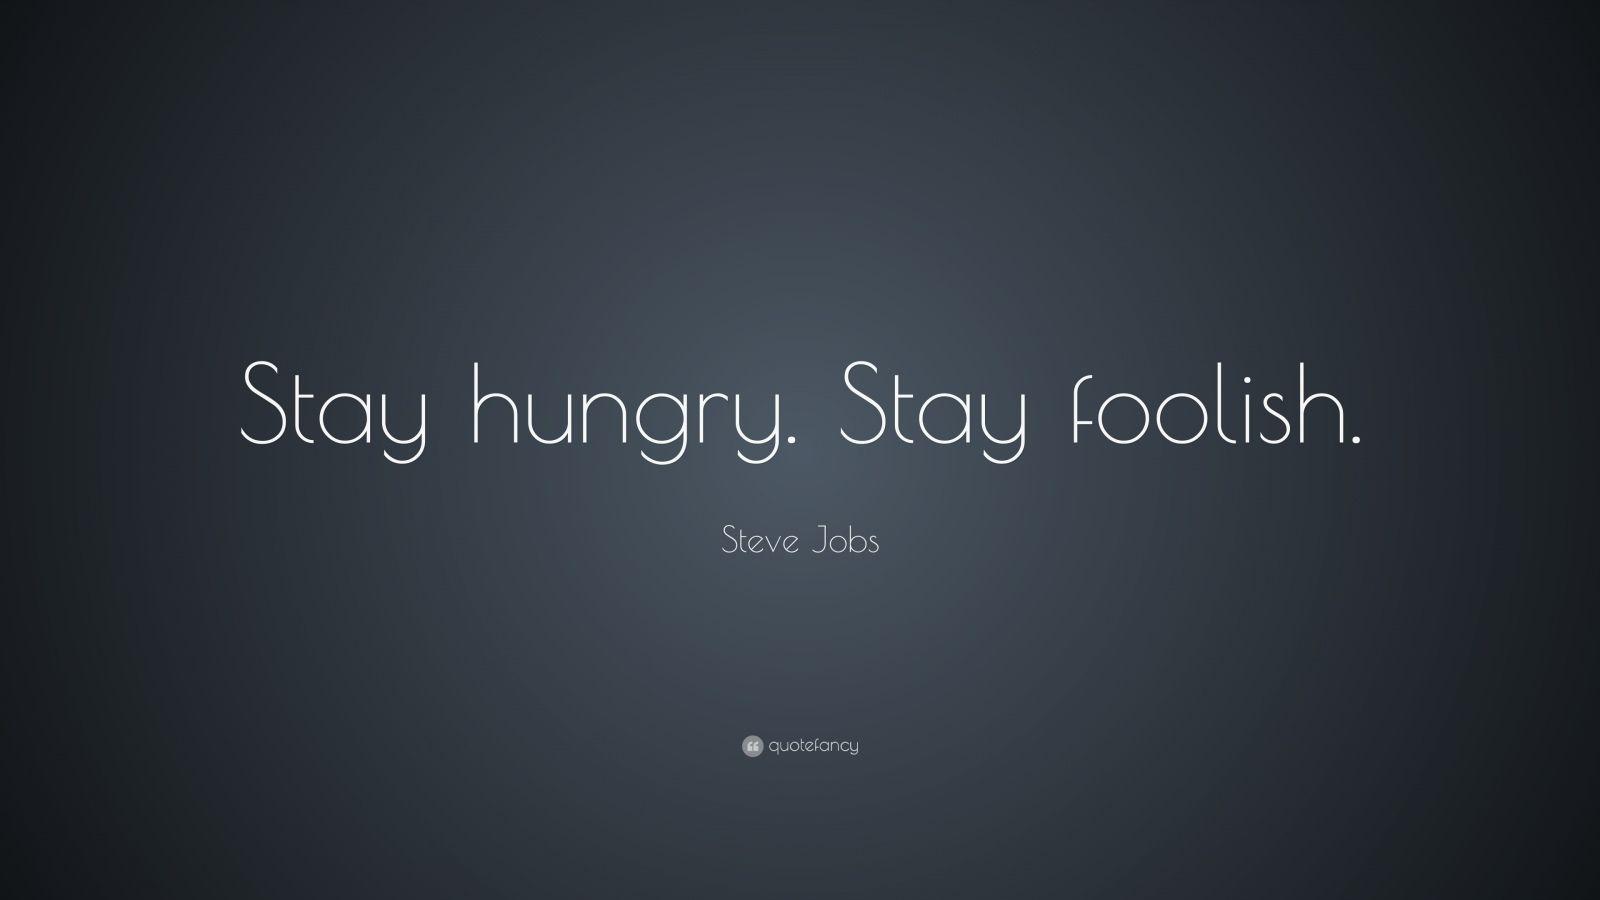 Steve Jobs Quotes. Job quotes, Startup quotes, Steve jobs quotes